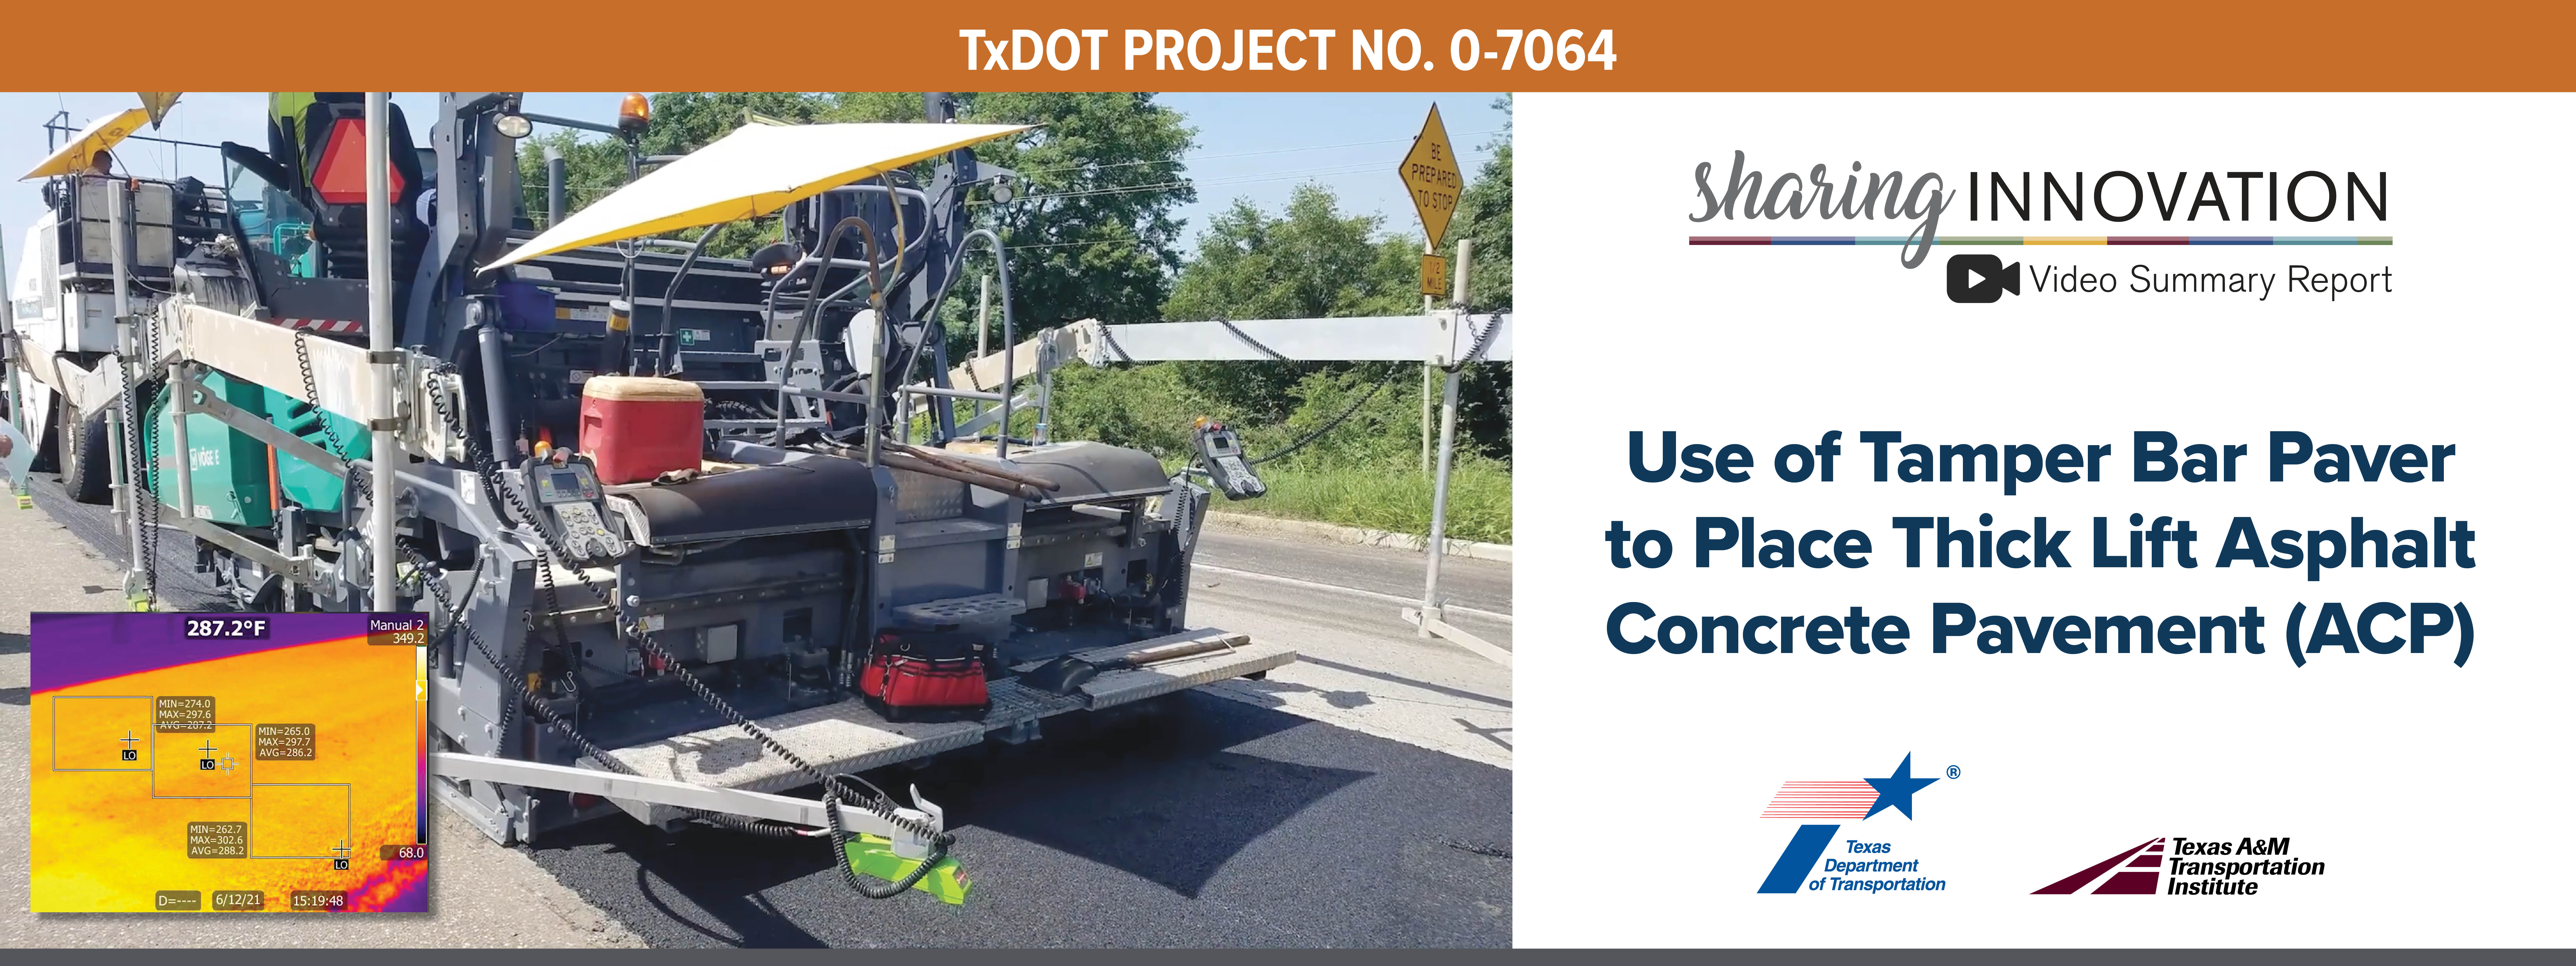 Sharing Innovation Video Summary Report: Use of Tamper Bar Paver to Place Thick Lift Asphalt Concrete Pavement (ACP)Sharing Innovation Video Summary Report: Use of Tamper Bar Paver to Place Thick Lift Asphalt Concrete Pavement (ACP)